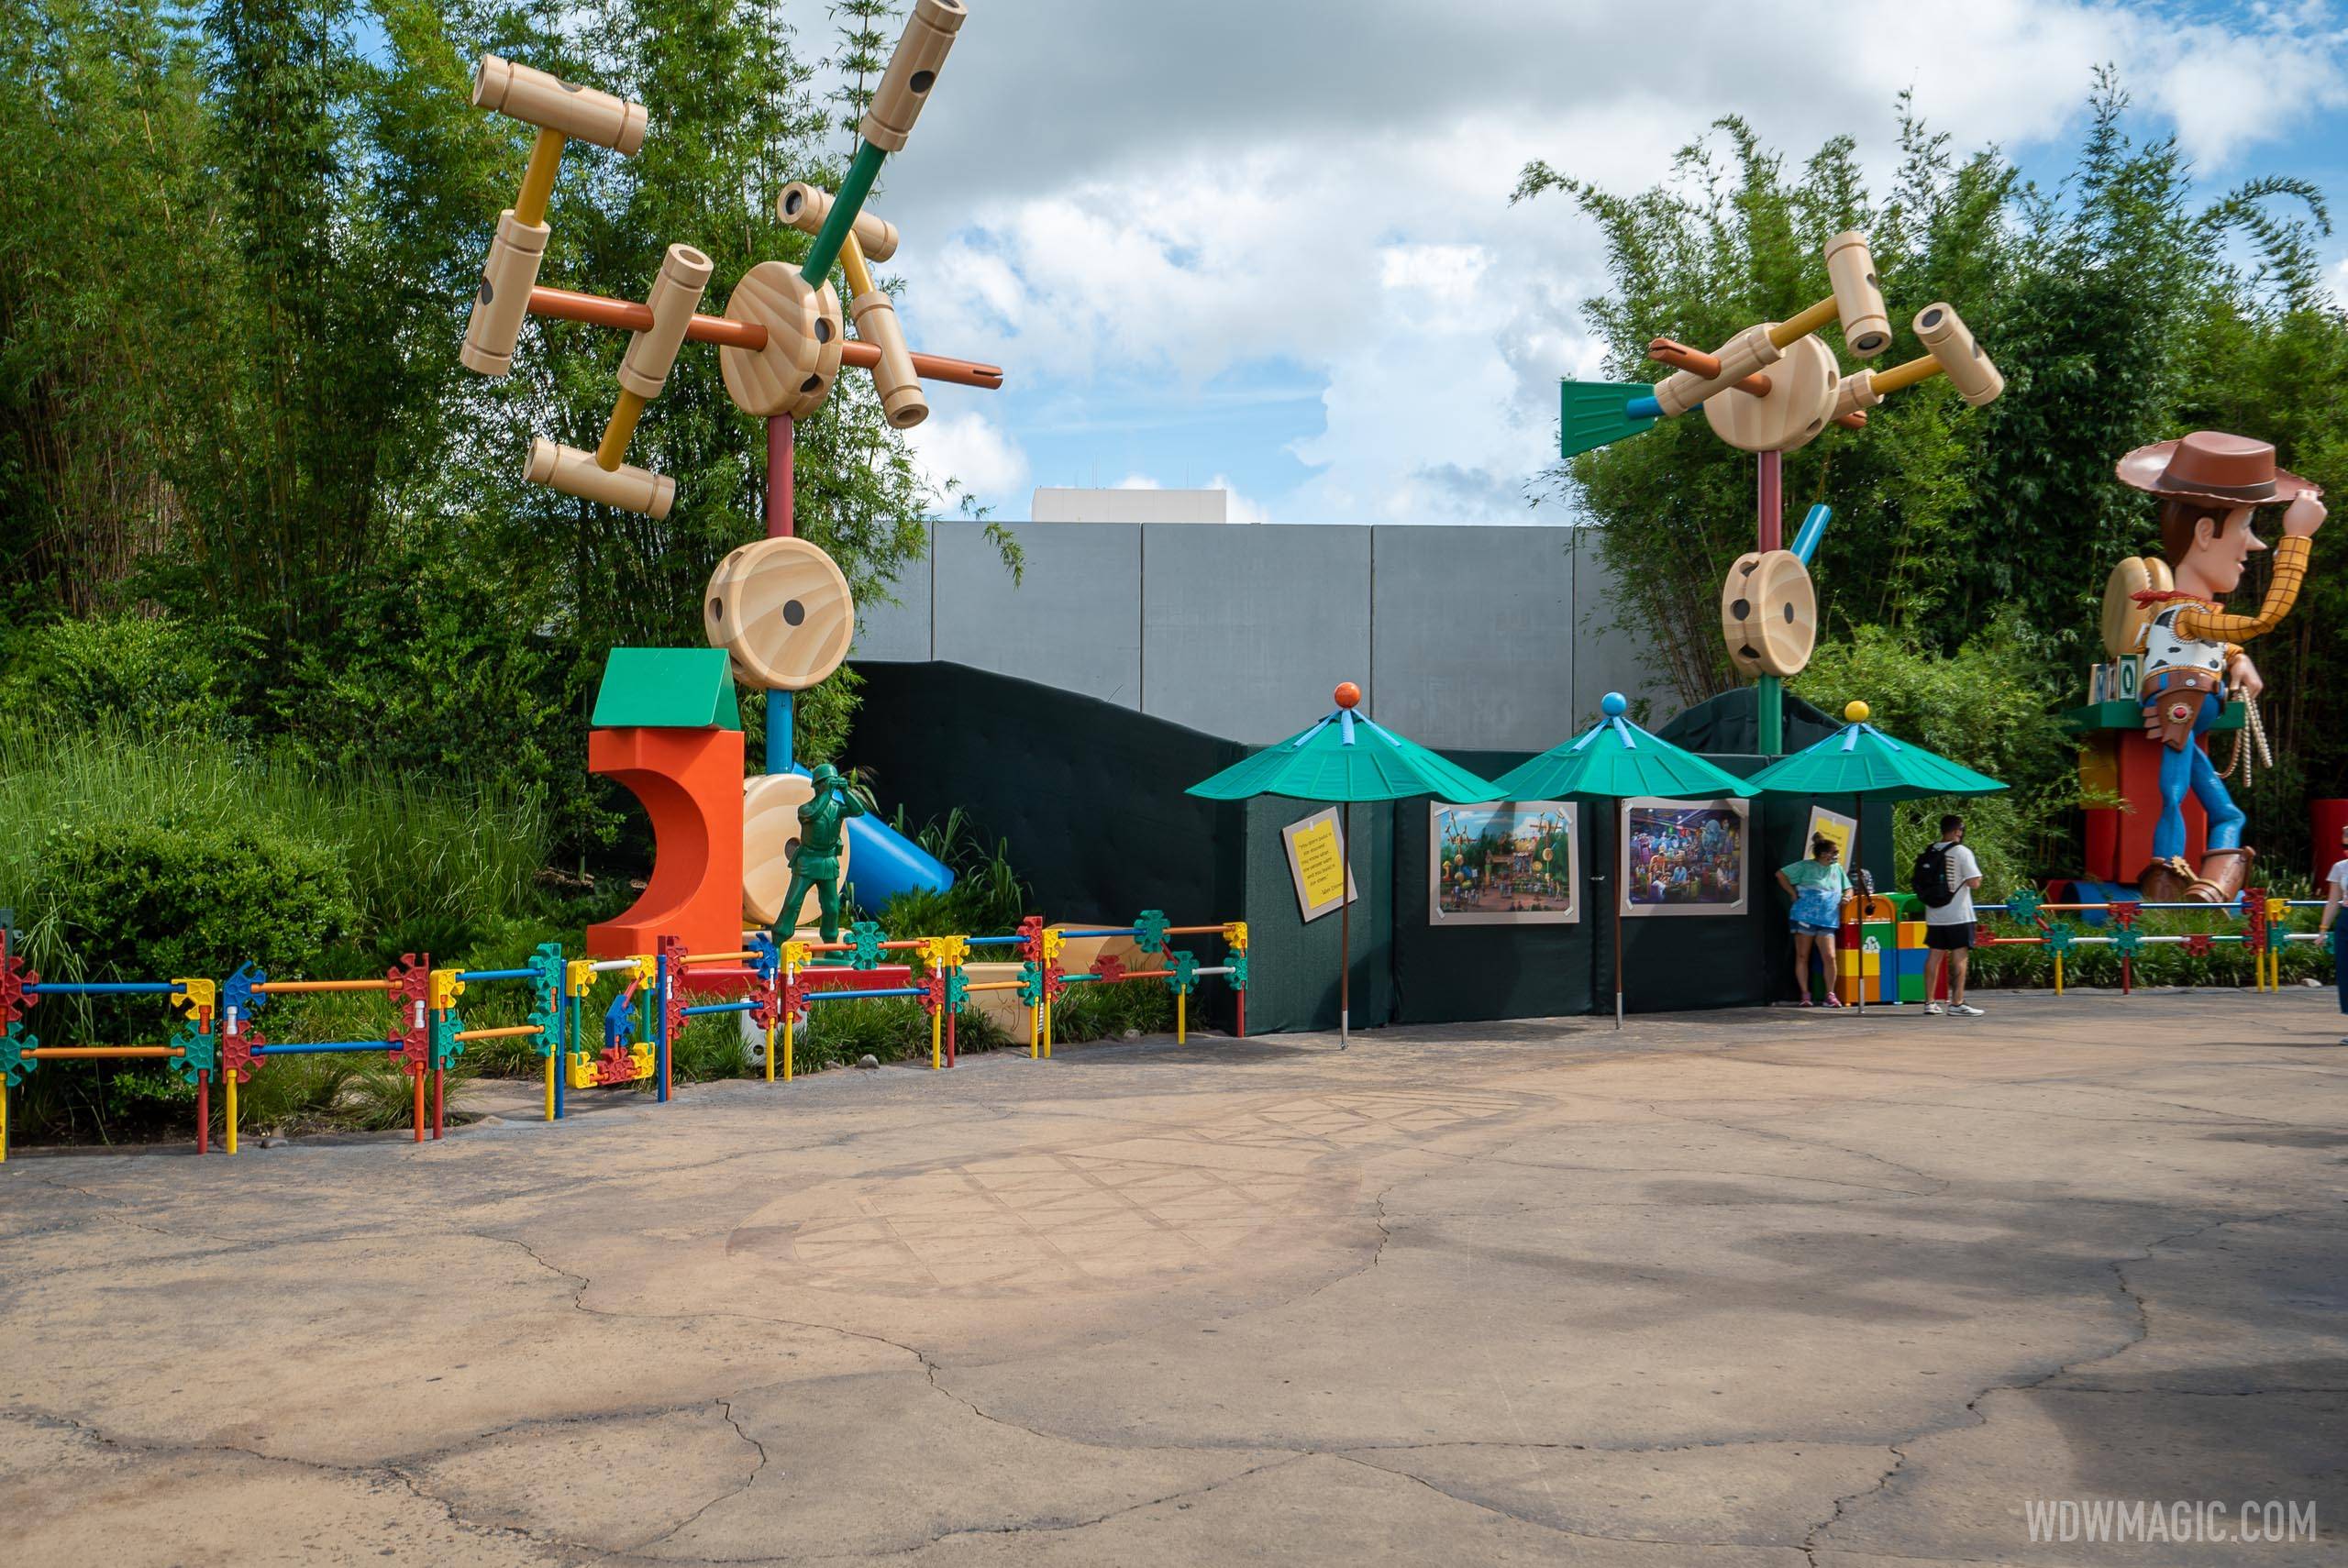 PHOTOS - A look at Roundup Rodeo BBQ in Toy Story Land at Disney's Hollywood Studios